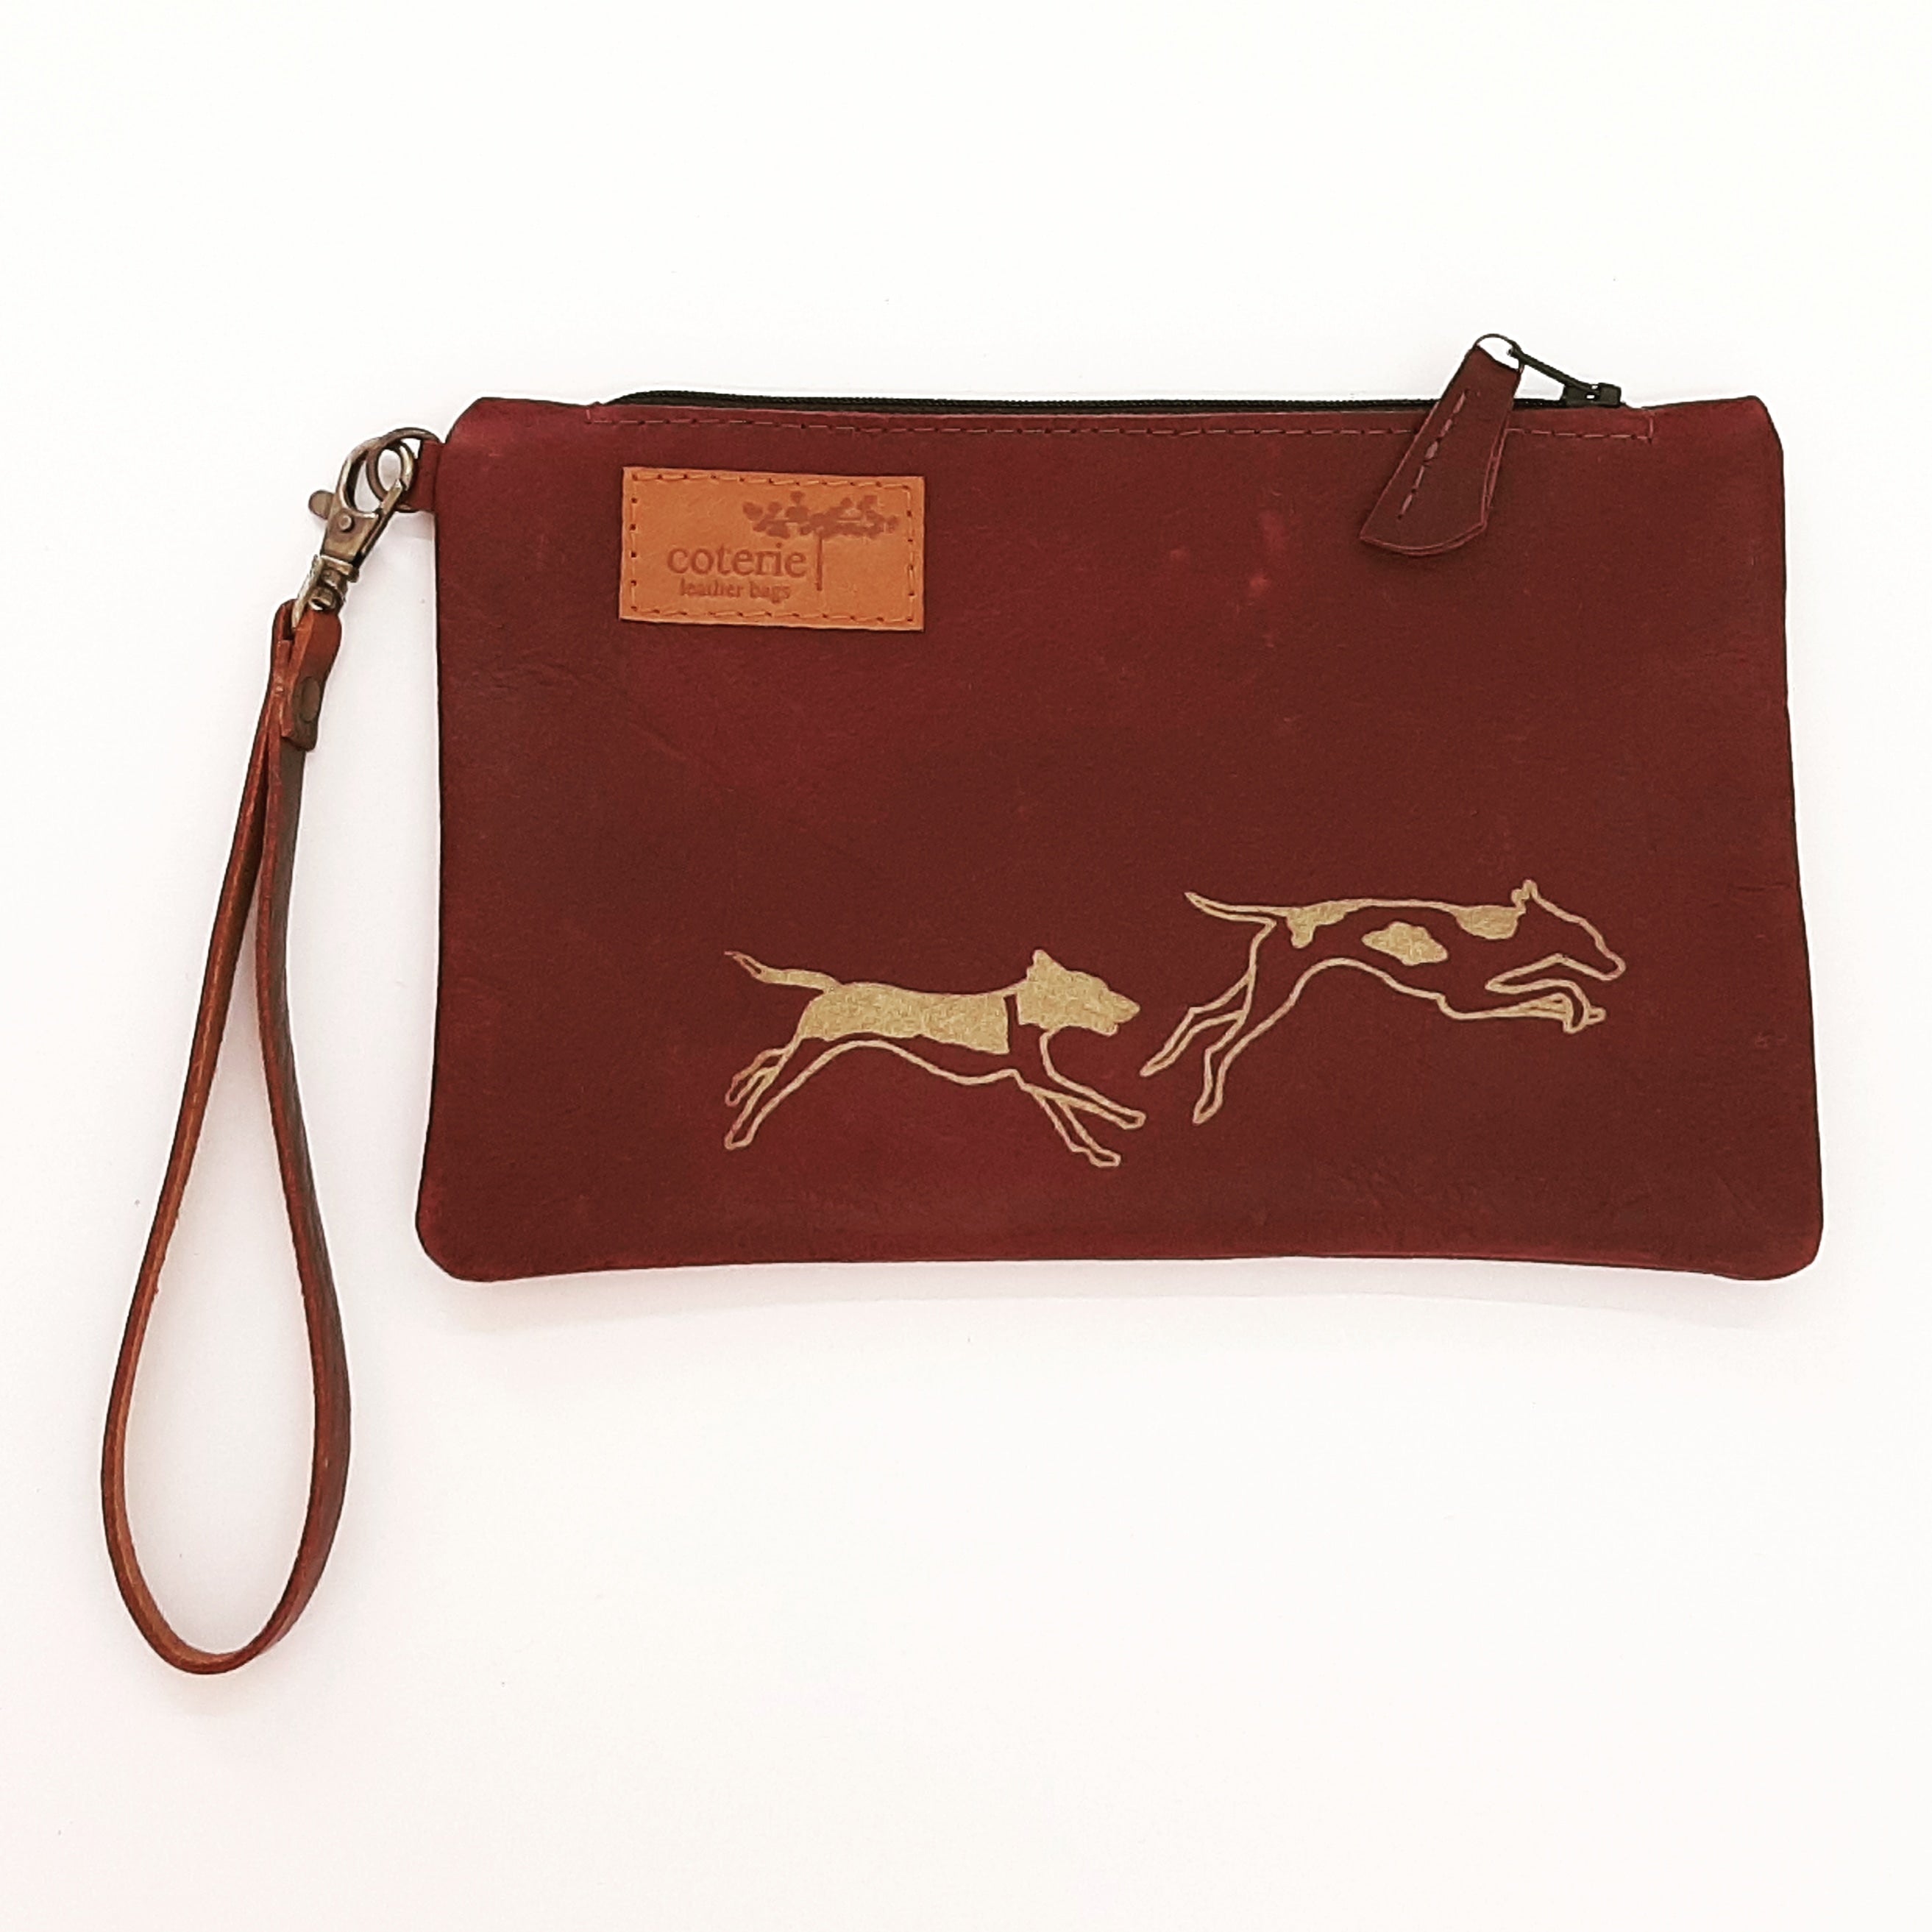 Fox & Hound Leather Purse - Coterie Leather Bags